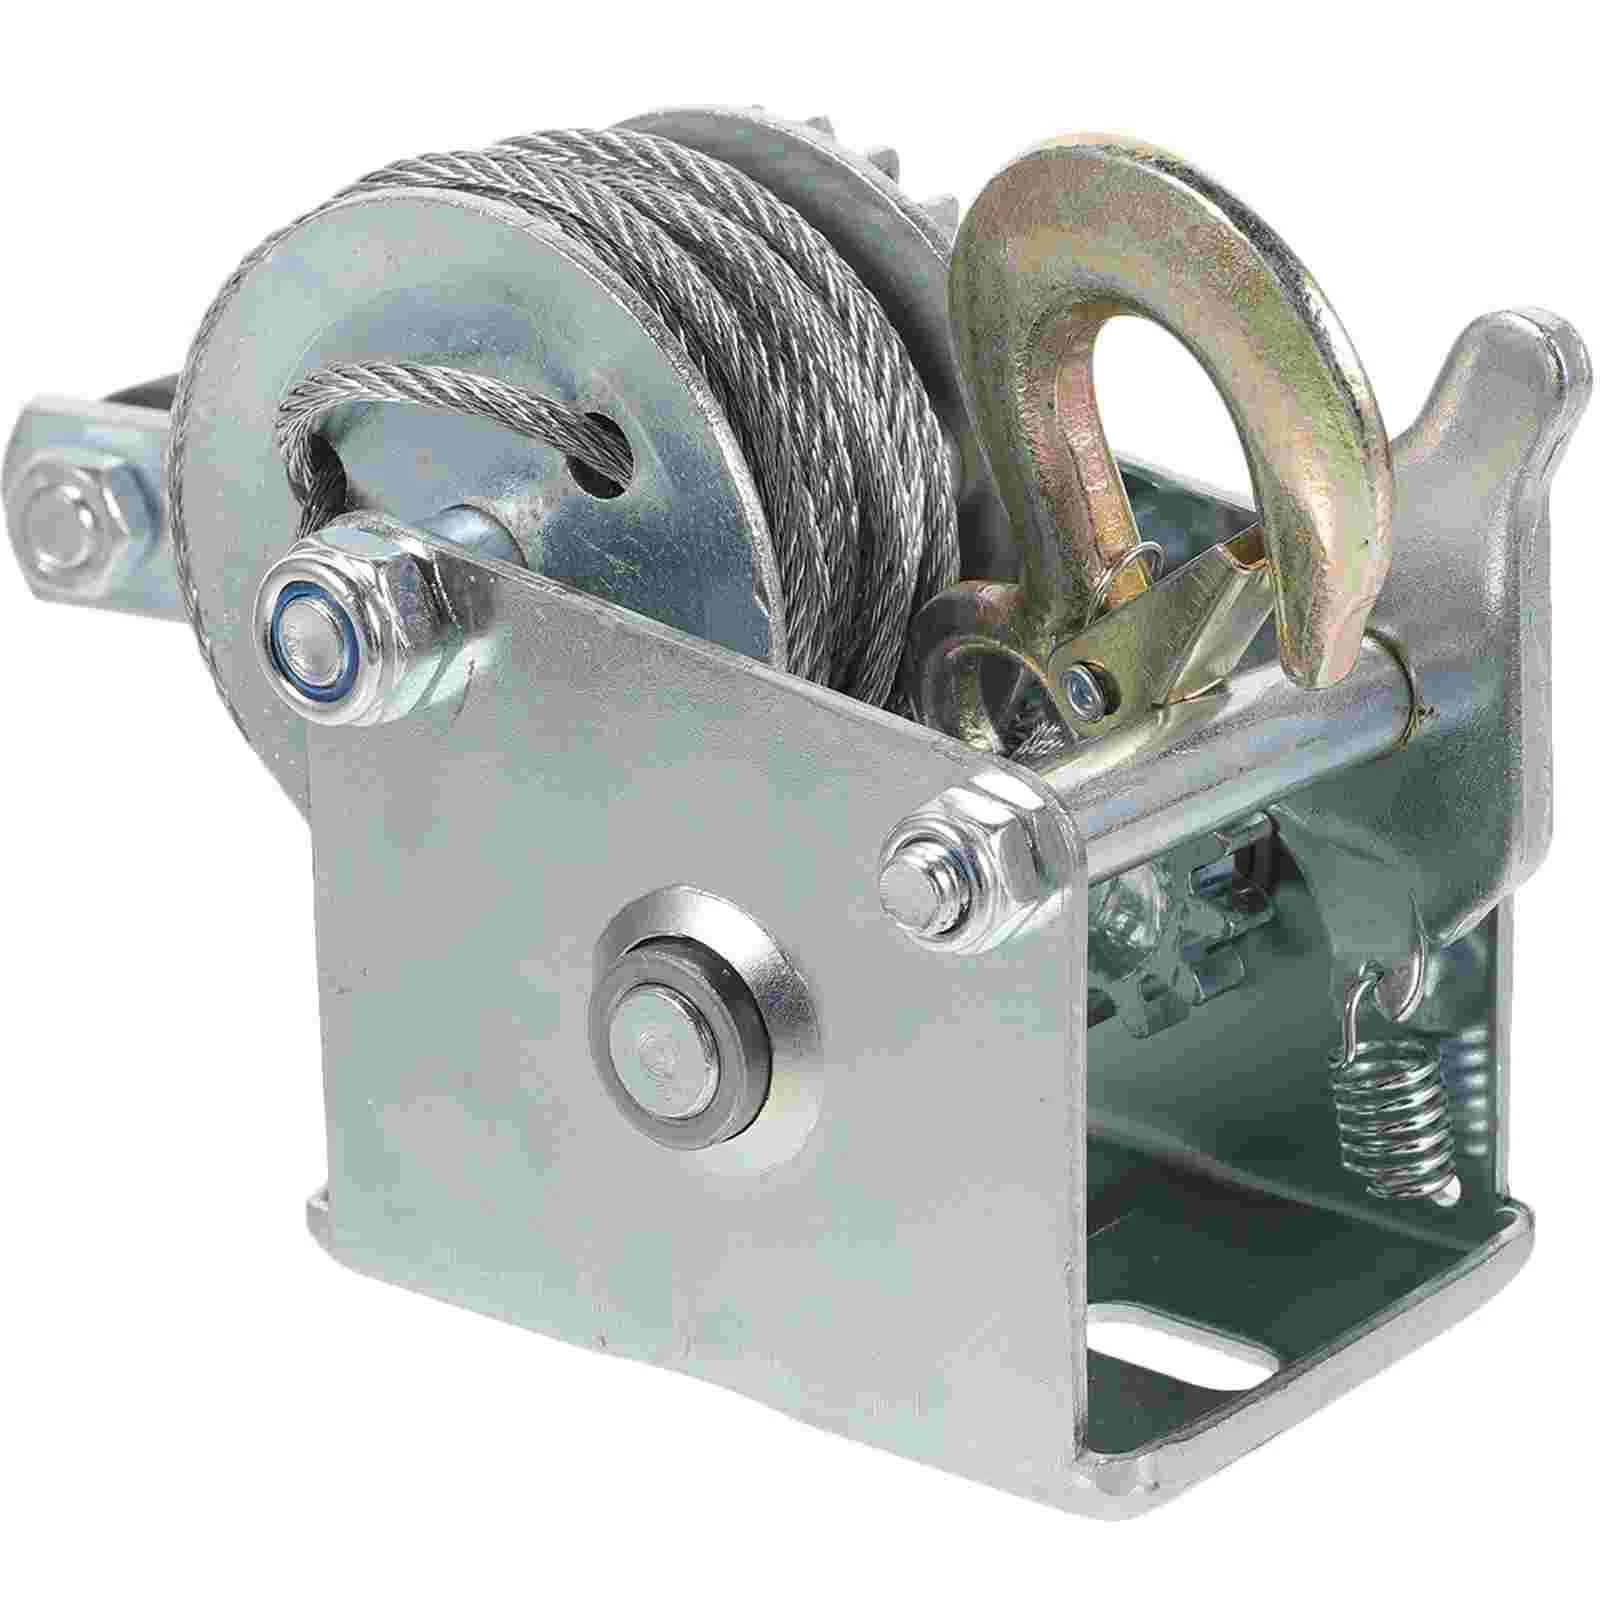 

Heavy Duty Winch Manual Towing Winch Mini Trailer Winch 500LBS (With 7m Steel Cable) Winches